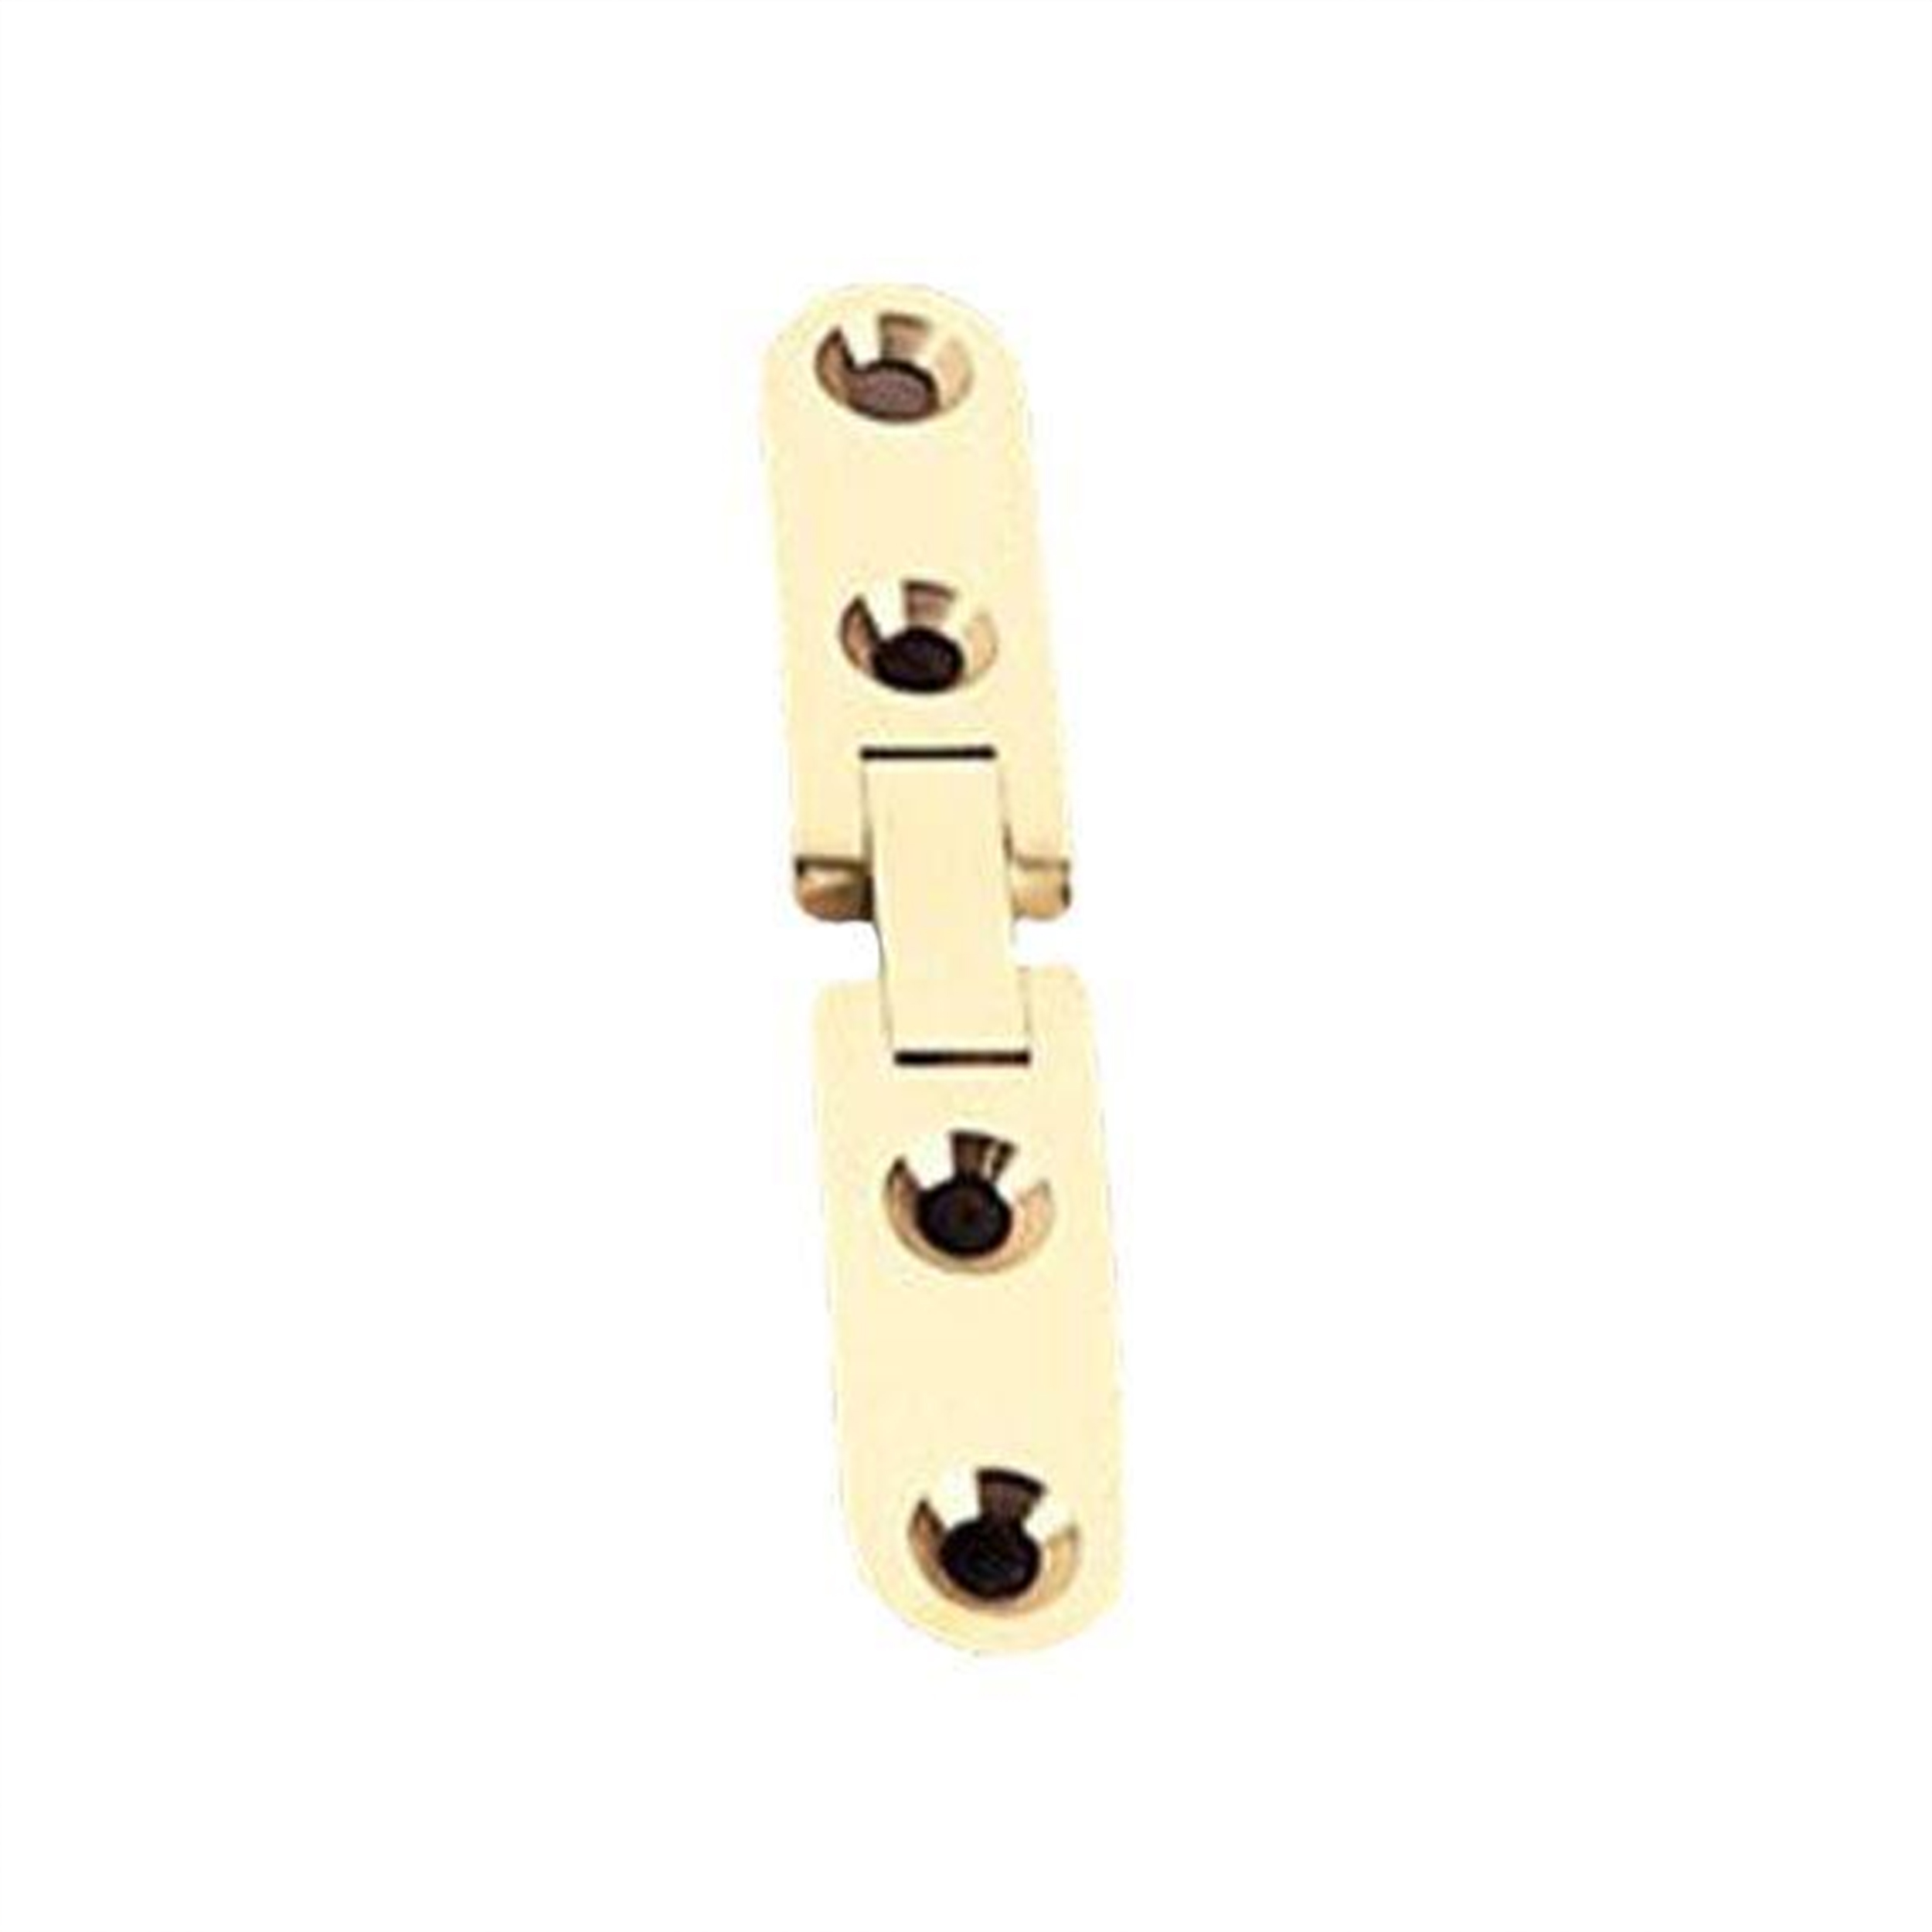 Narrow Table Hinge, Polished Brass, 2-3/4" L X 1/2" W Hinge, Requires No. 6 Screws Not Included